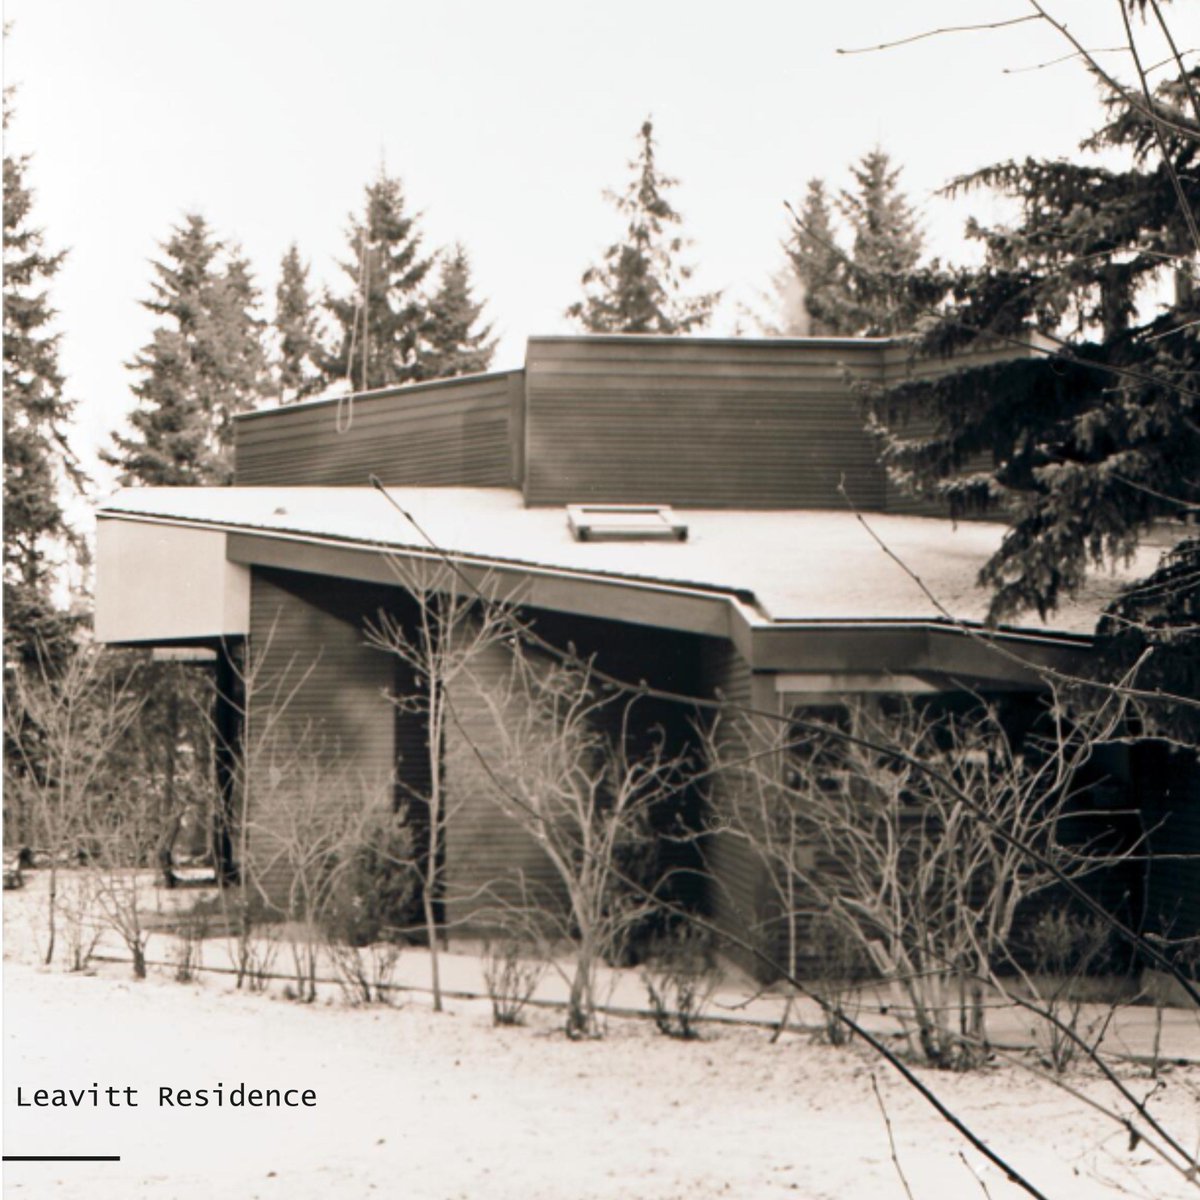 What’s the history of modern architecture in Calgary residential housing? Calgary's post-war buildings, shaped by functionalism and the rugged climate, exhibit a unique foothills architectural style, diverging from national trends.